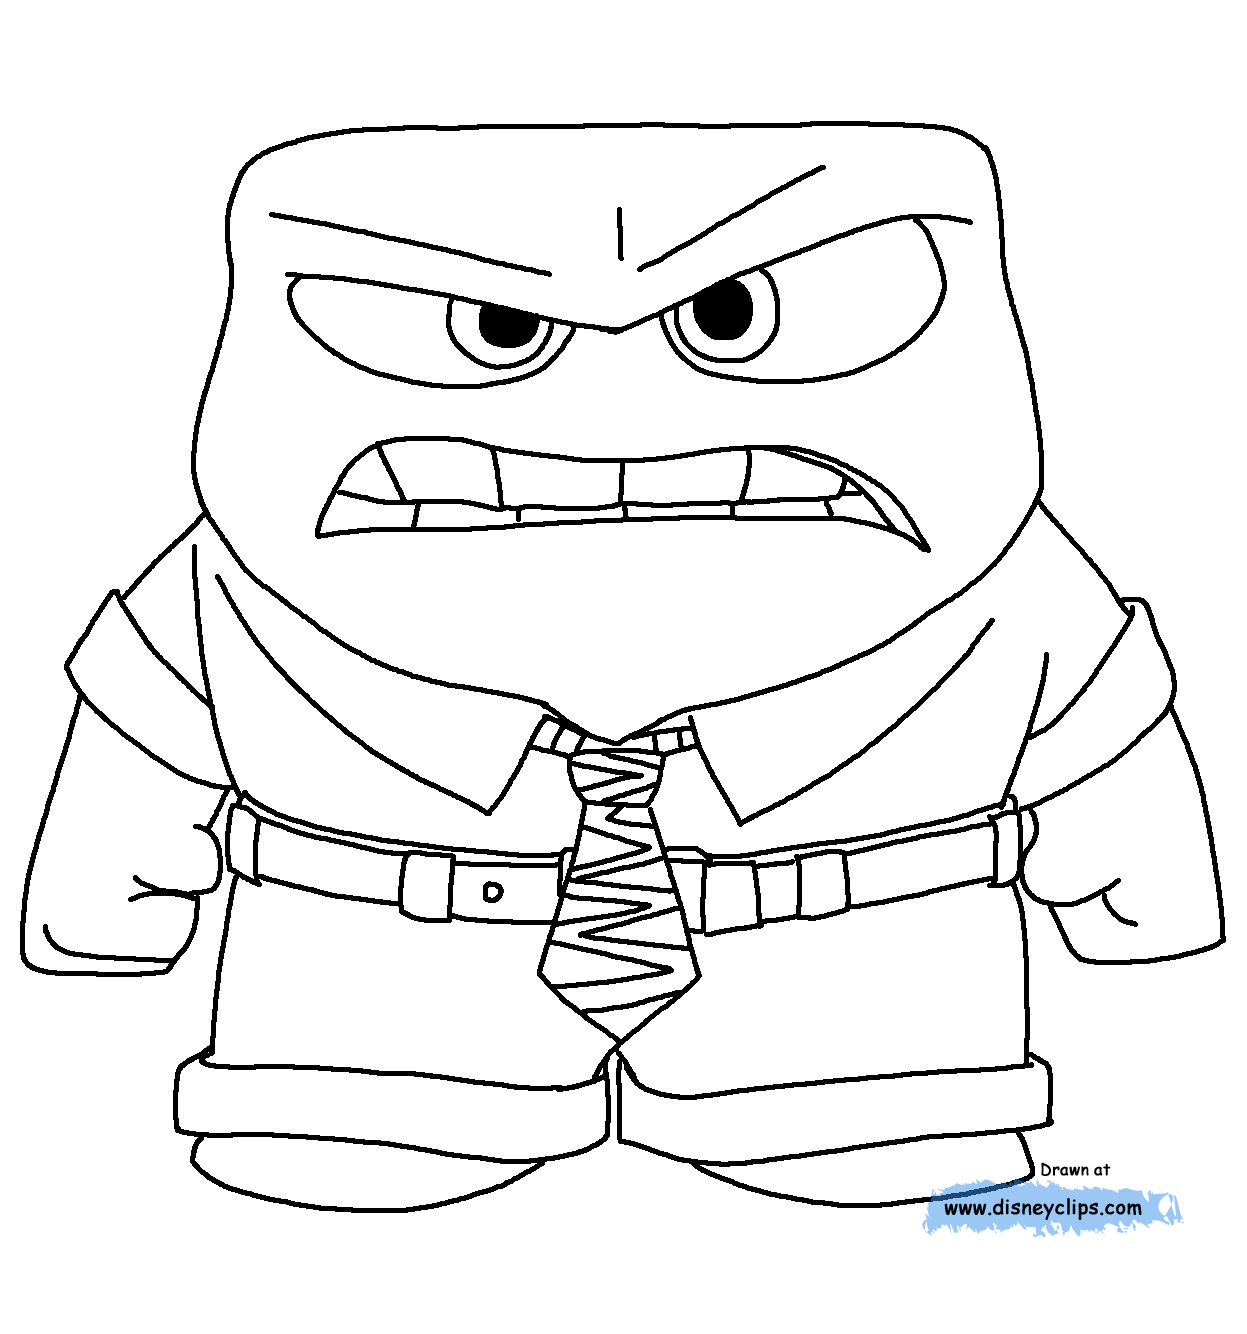 Anger coloring #20, Download drawings